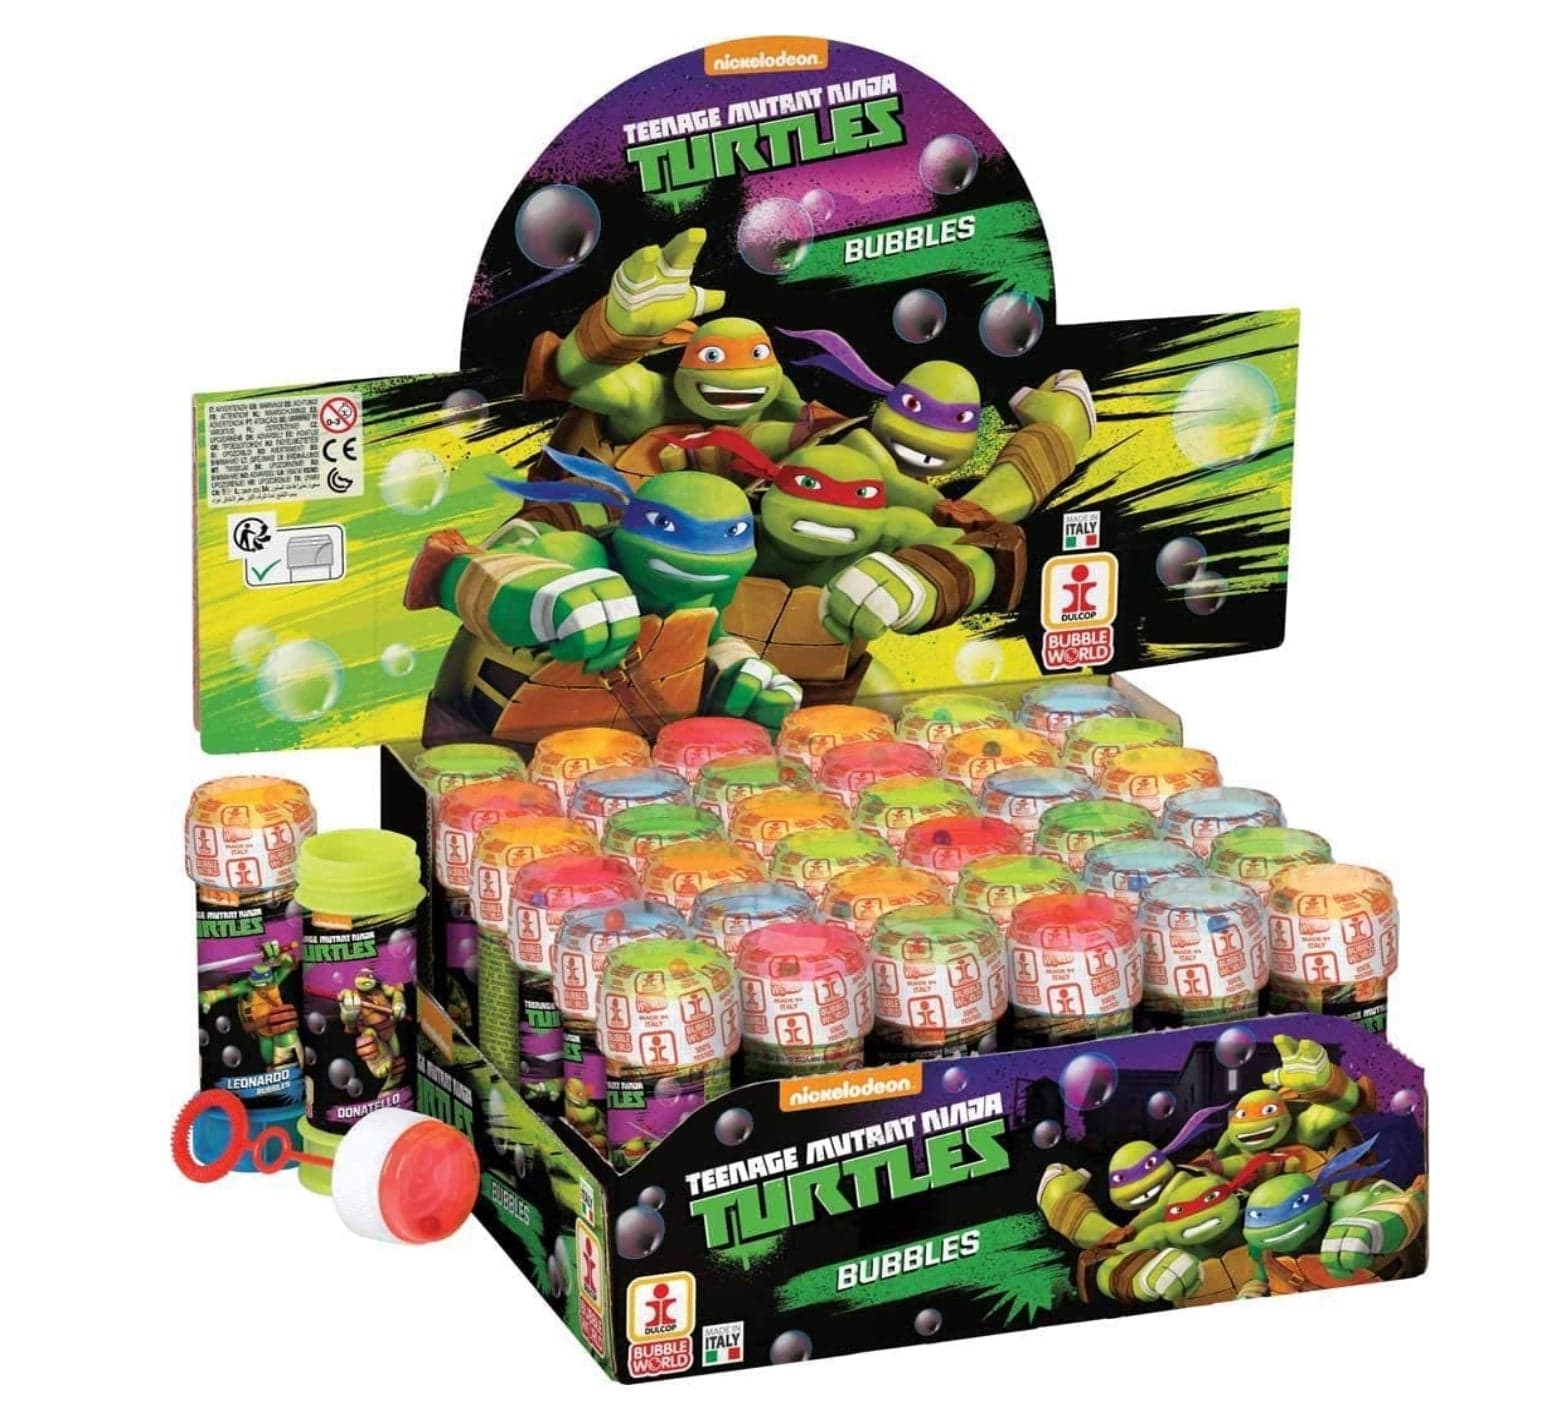 Nickelodeon TMNT Party Bubbles Boys/Kids Childrens Loot Bag Fillers Toys Gift